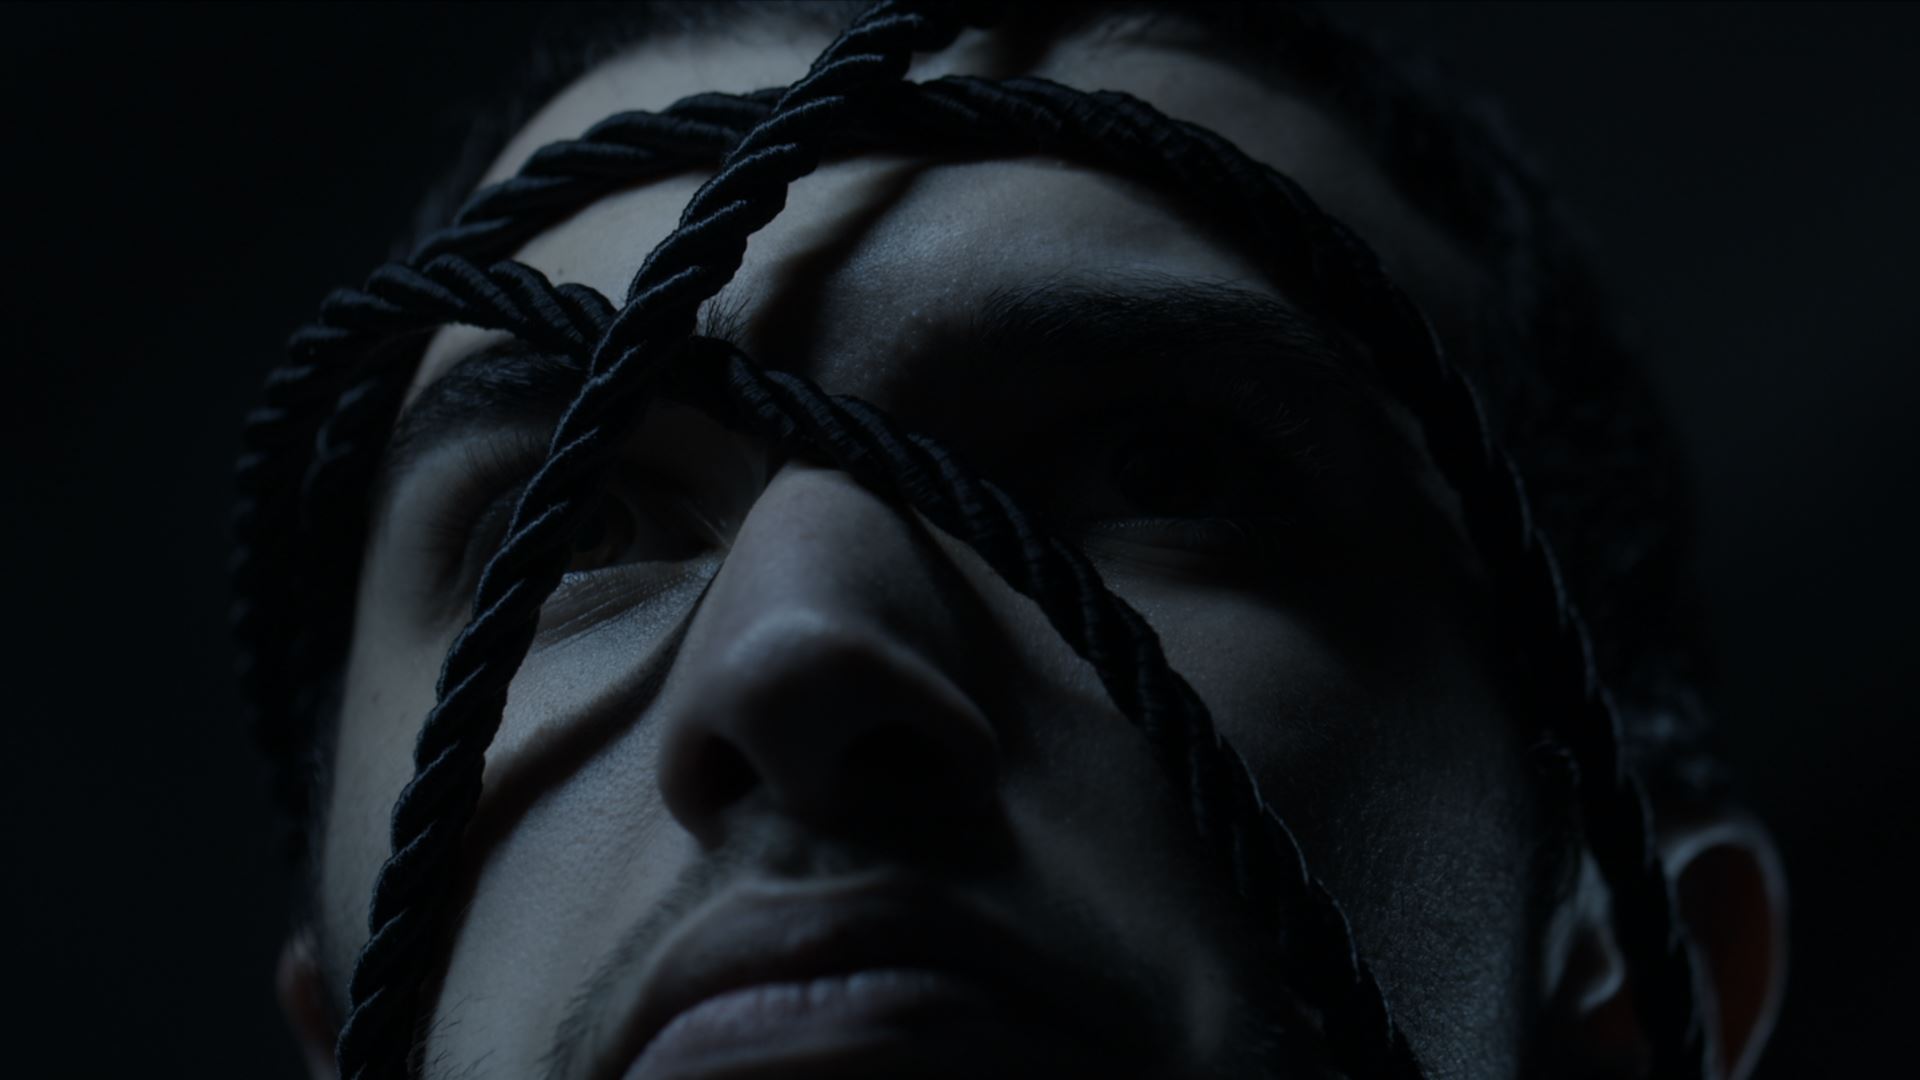 A dark image of a person's face, covered in black rope.